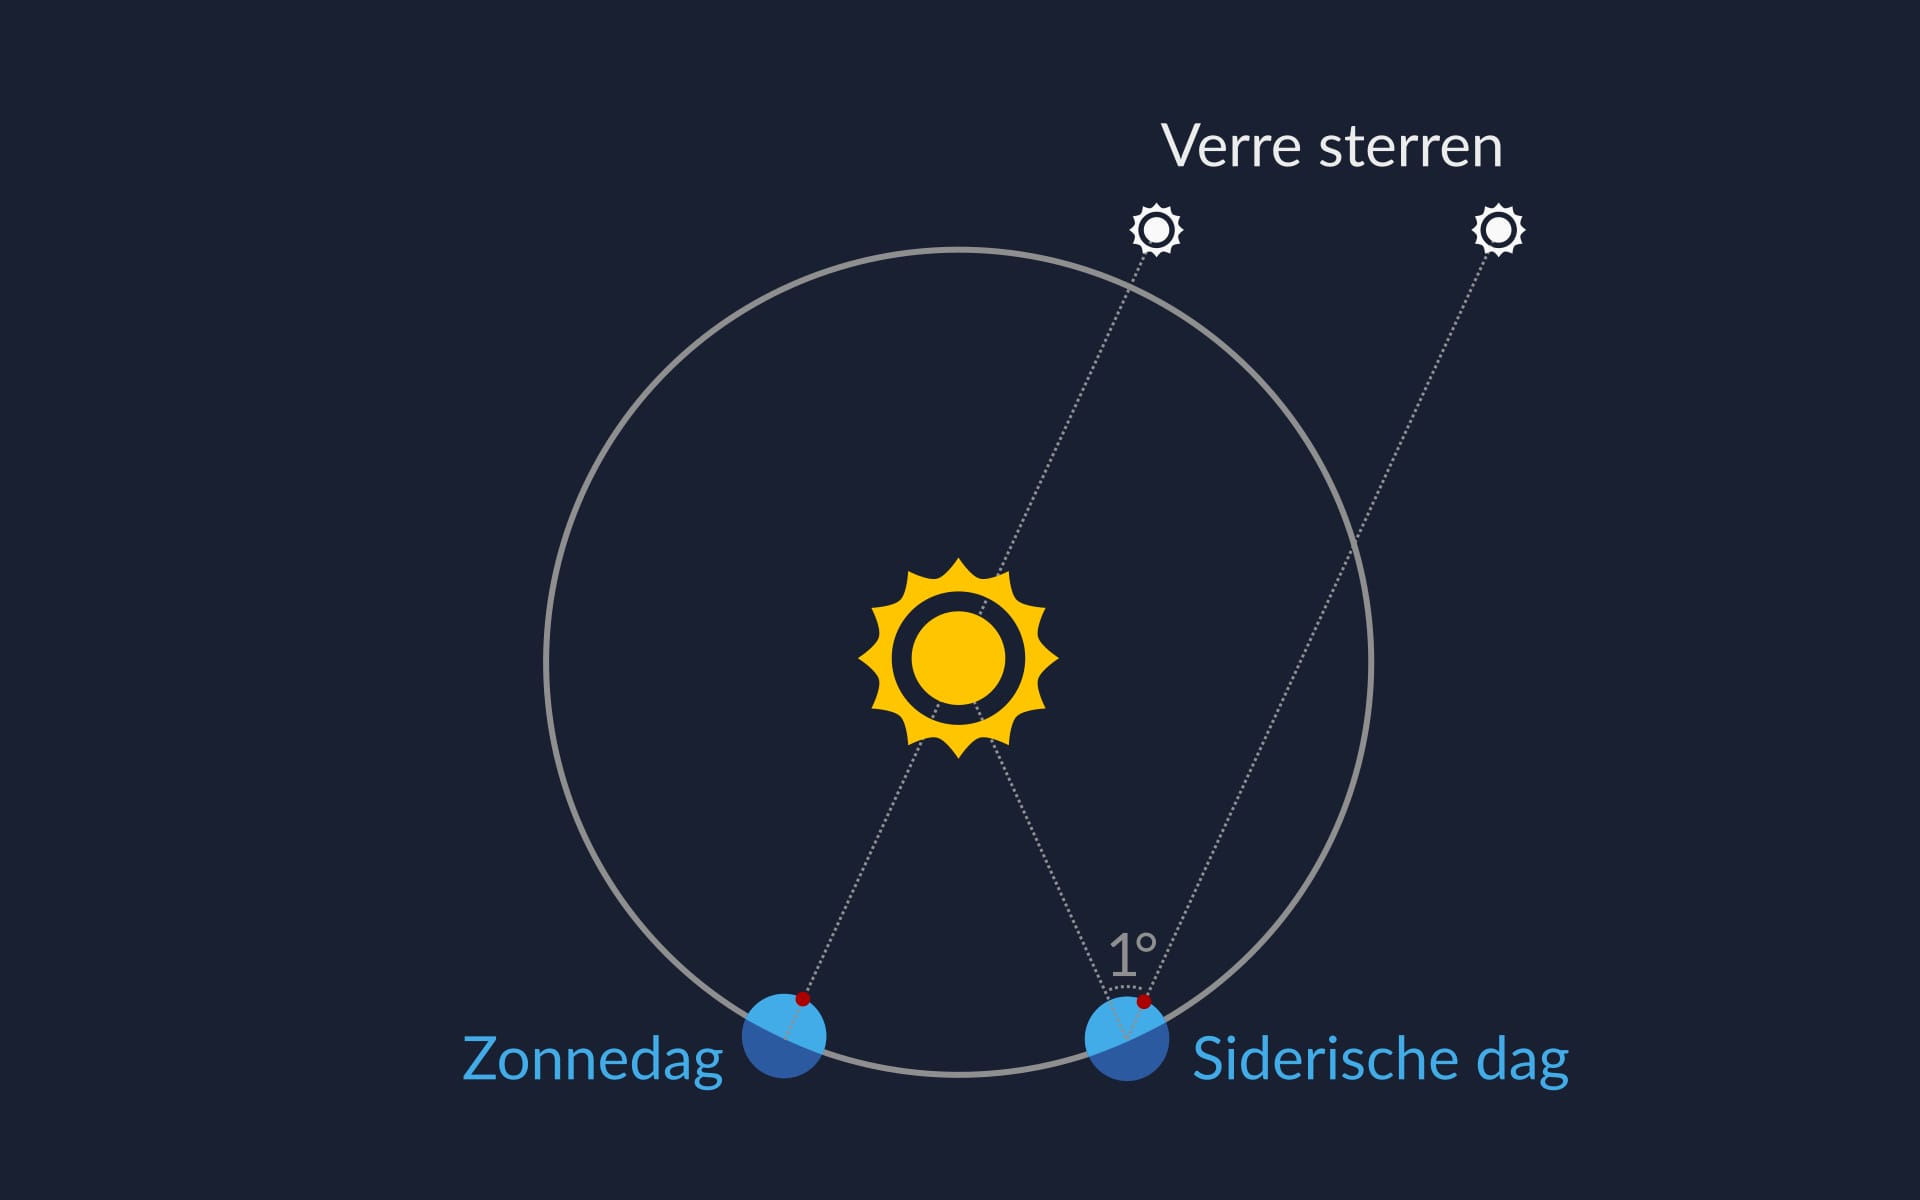 Sidereal day vs. Solar day